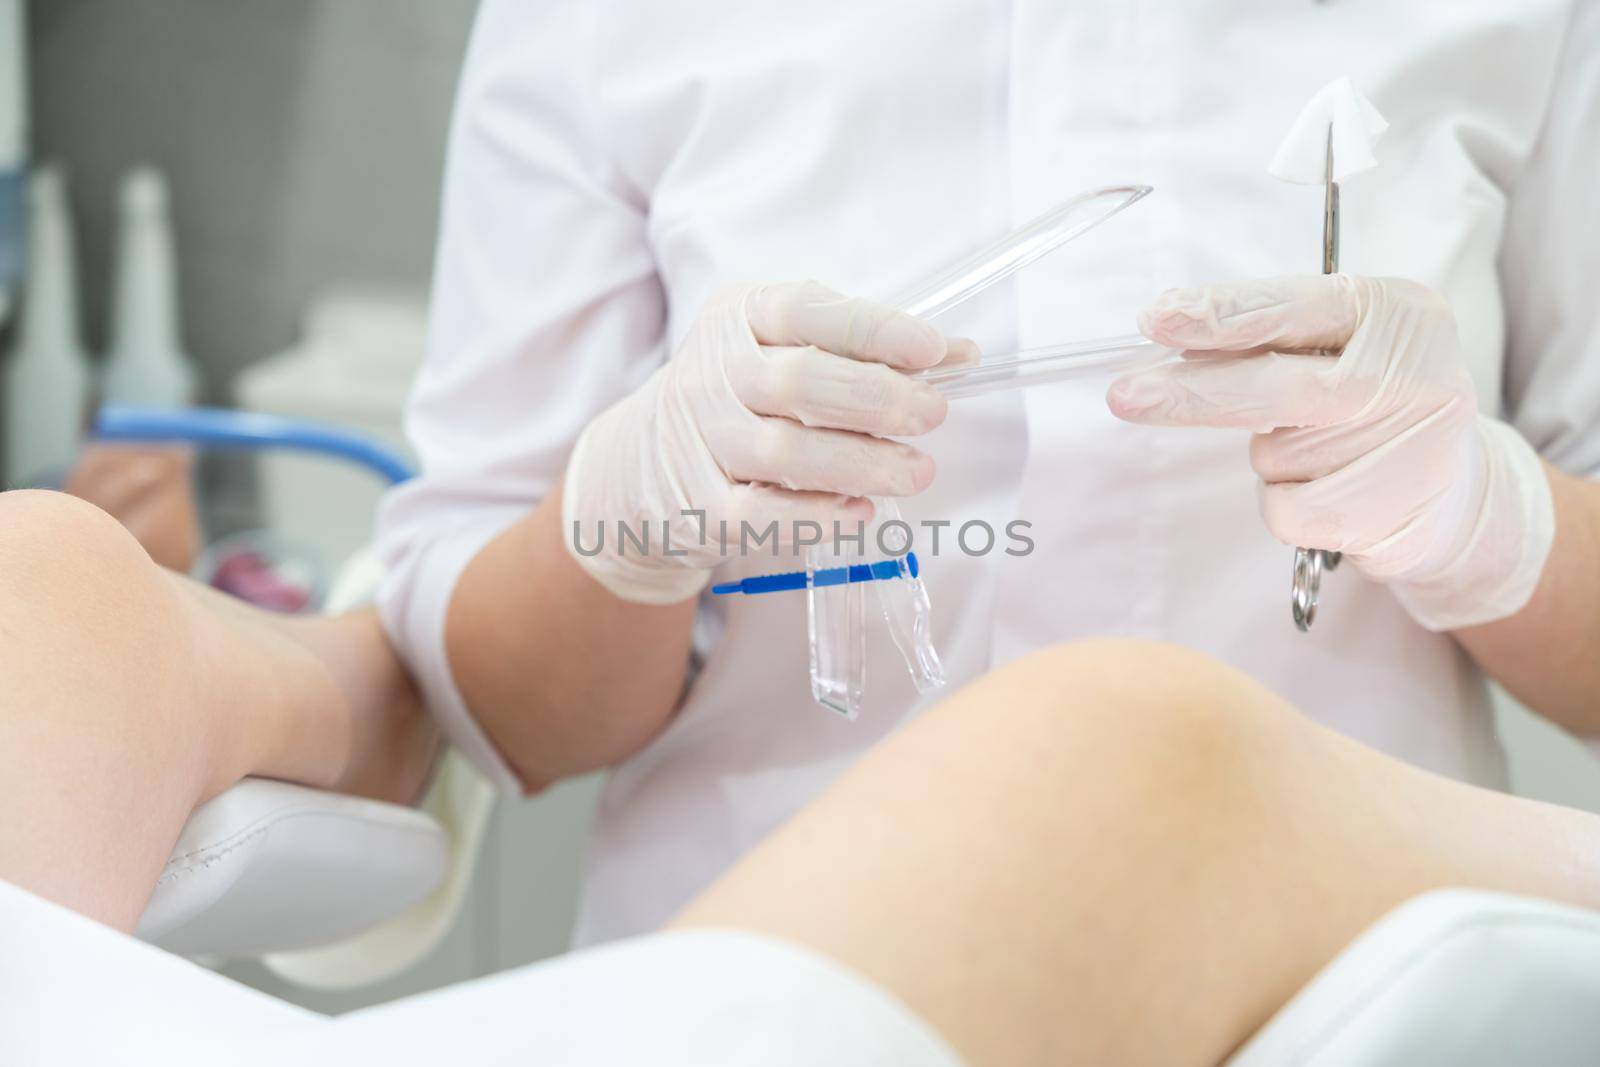 Gynecologist ready to use vaginal speculum instrument to exam patient by Mariakray